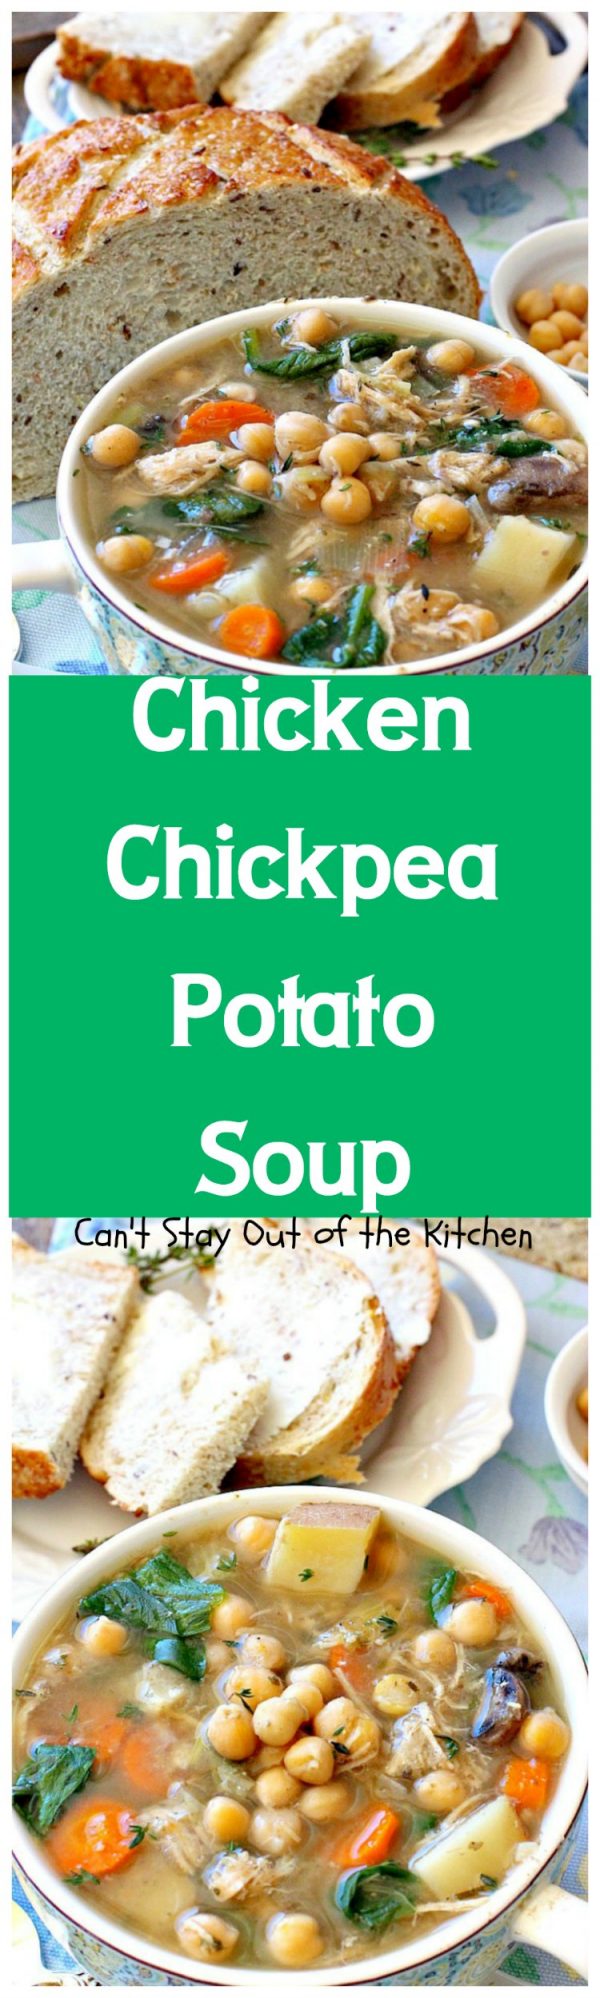 Chicken-Chickpea-Potato Soup – Can't Stay Out of the Kitchen